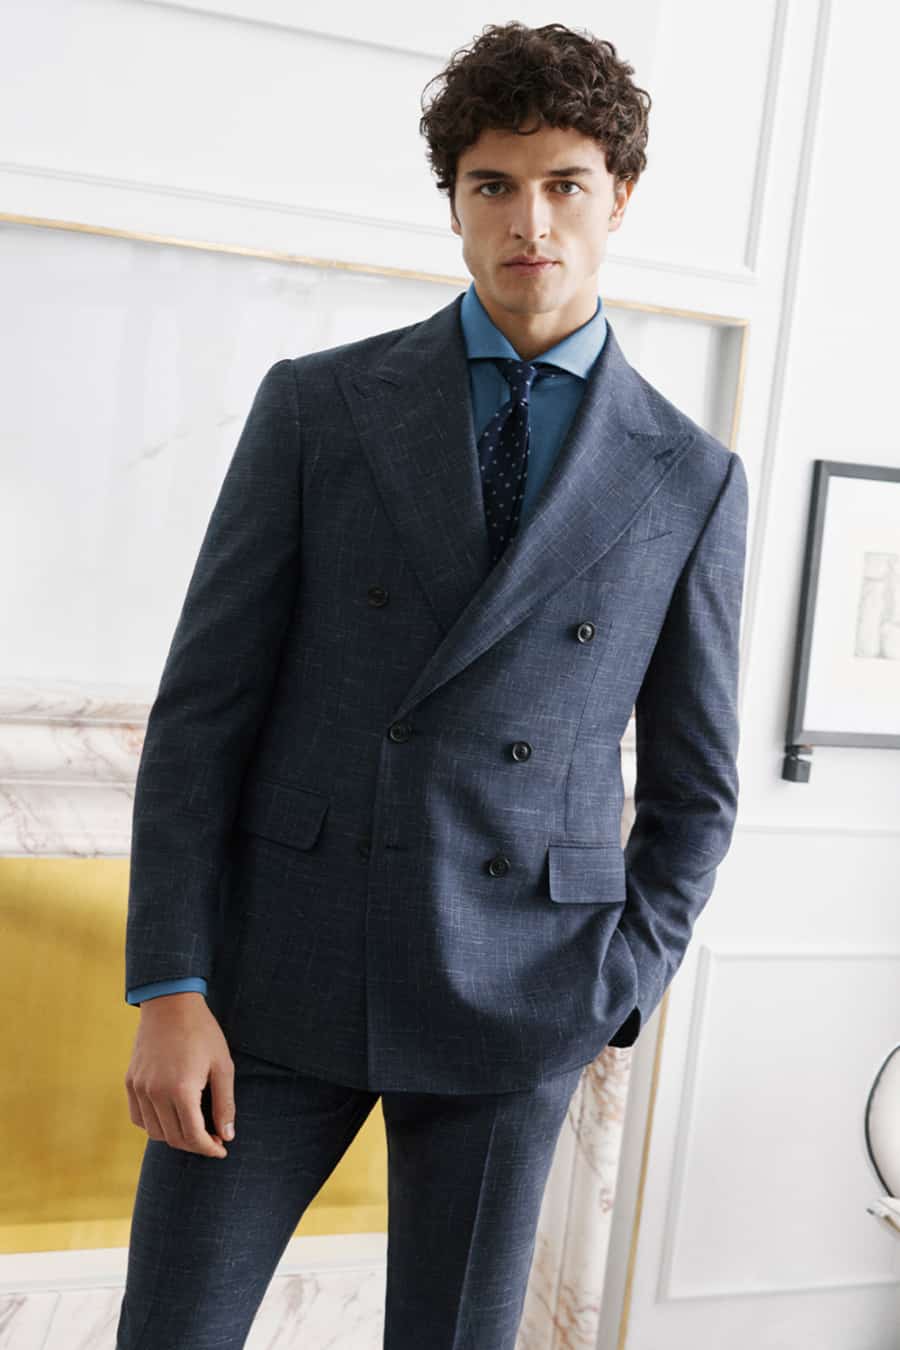 Men's double-breasted, high quality suit